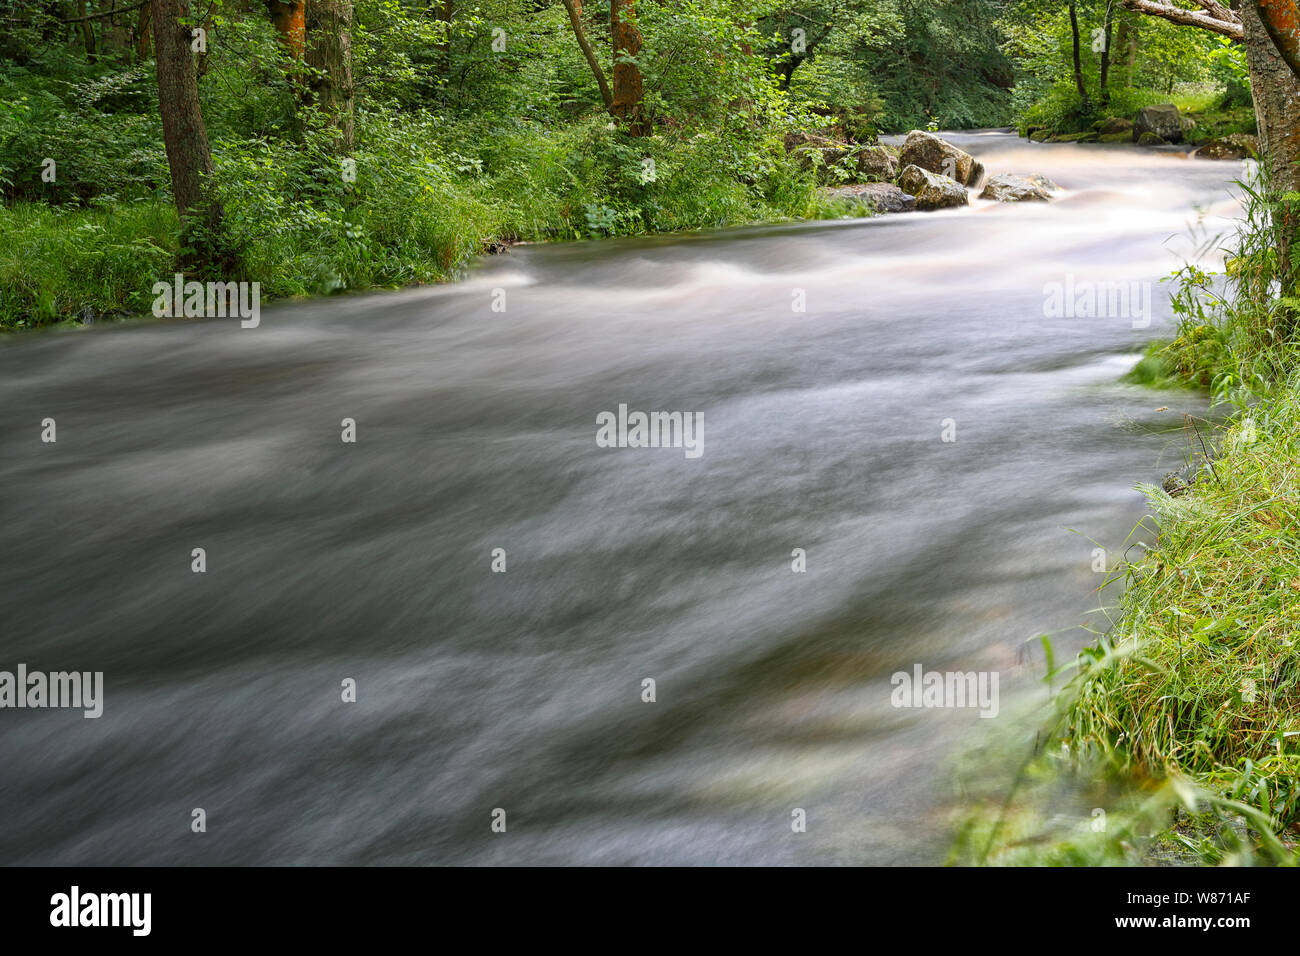 The River Washburn in Nidderdale showing fast flowing water due to water release from Thruscross reservoir by Yorkshire Water Company for canoeing Stock Photo